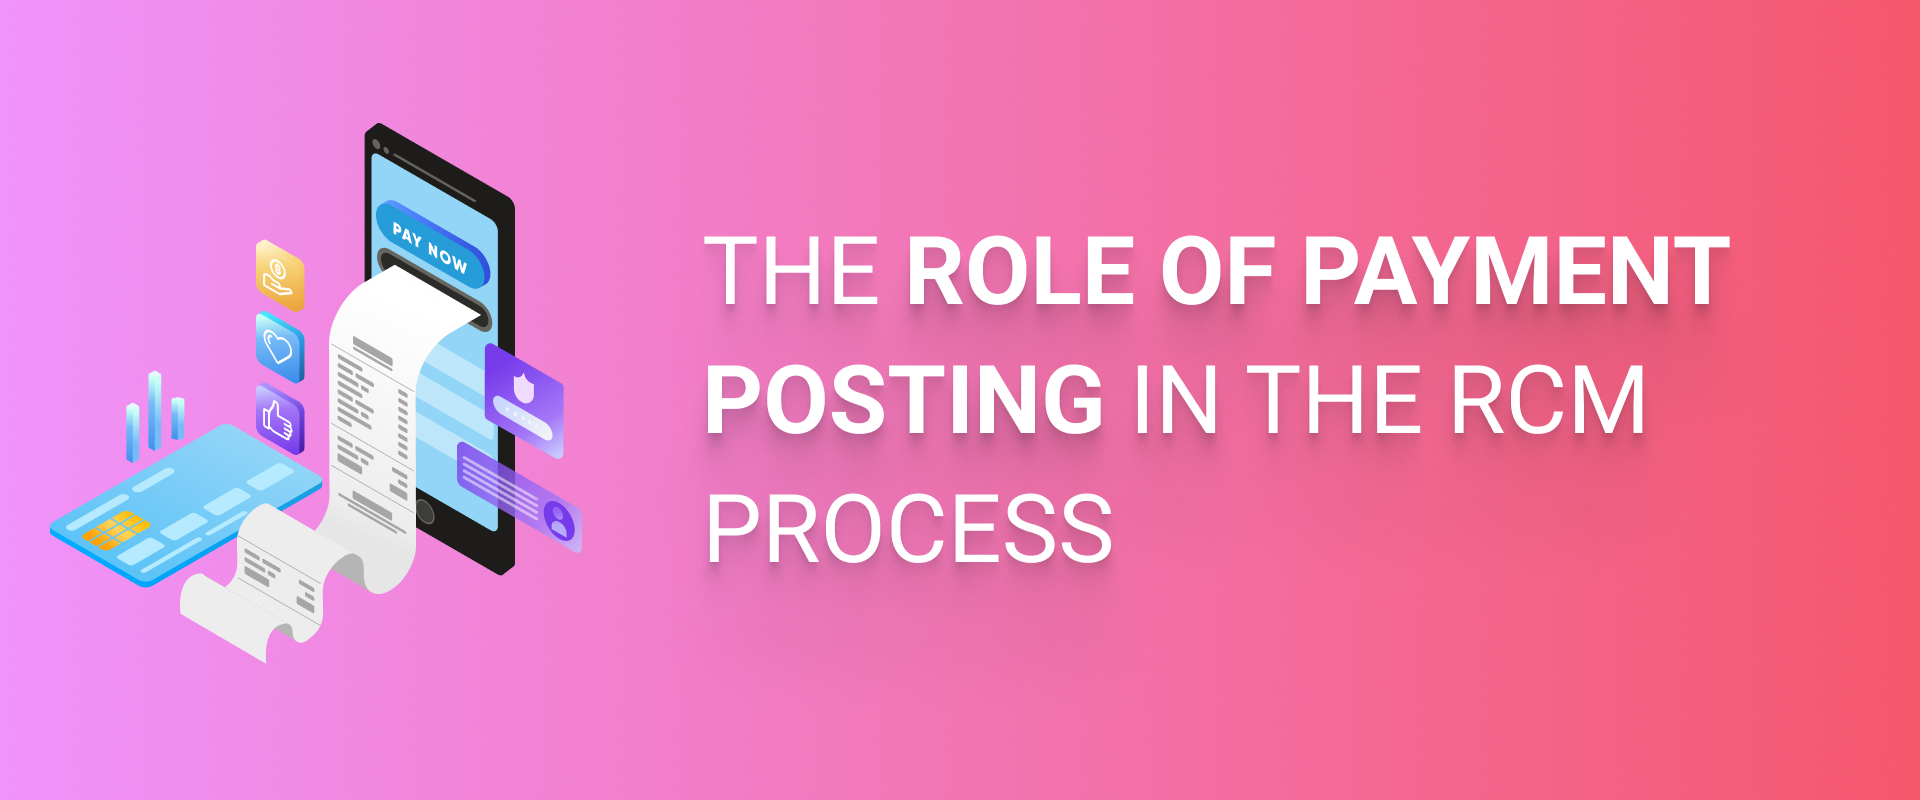 role of payment posting in rcm